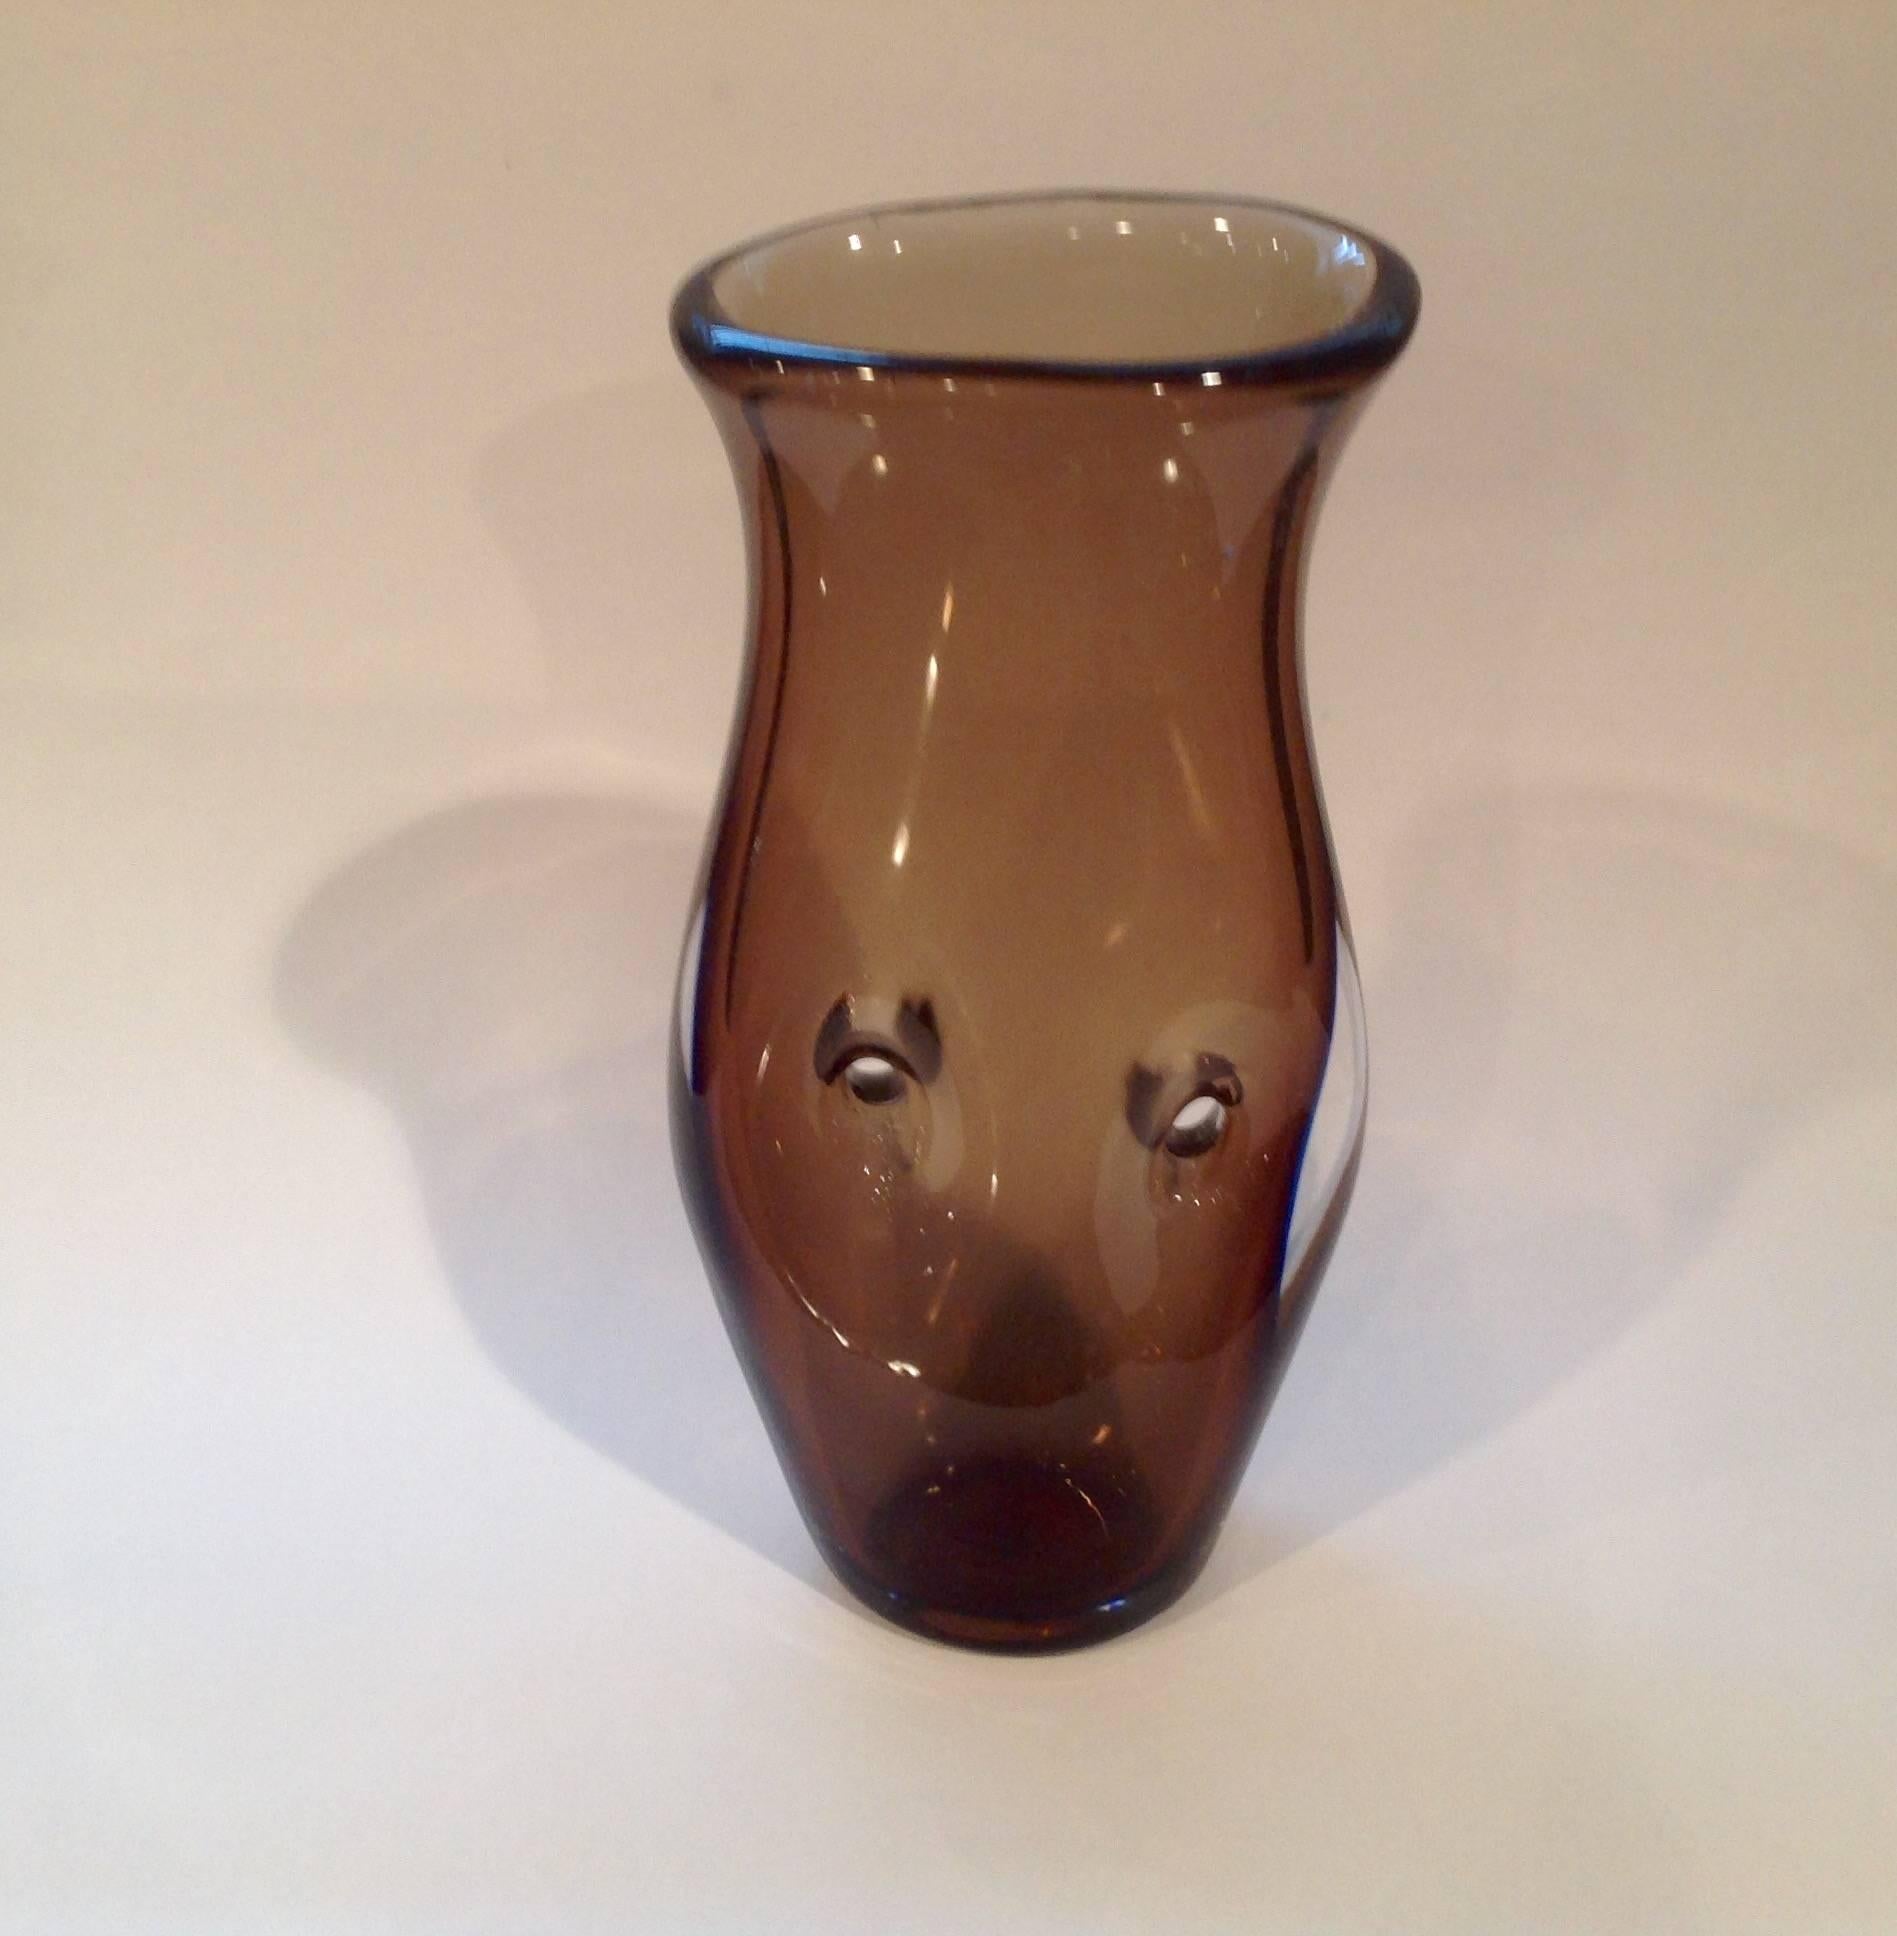 Rare acid signed Sommerso vase by Fulvio Bianconi for Venini. Signed with three line acid stamp 